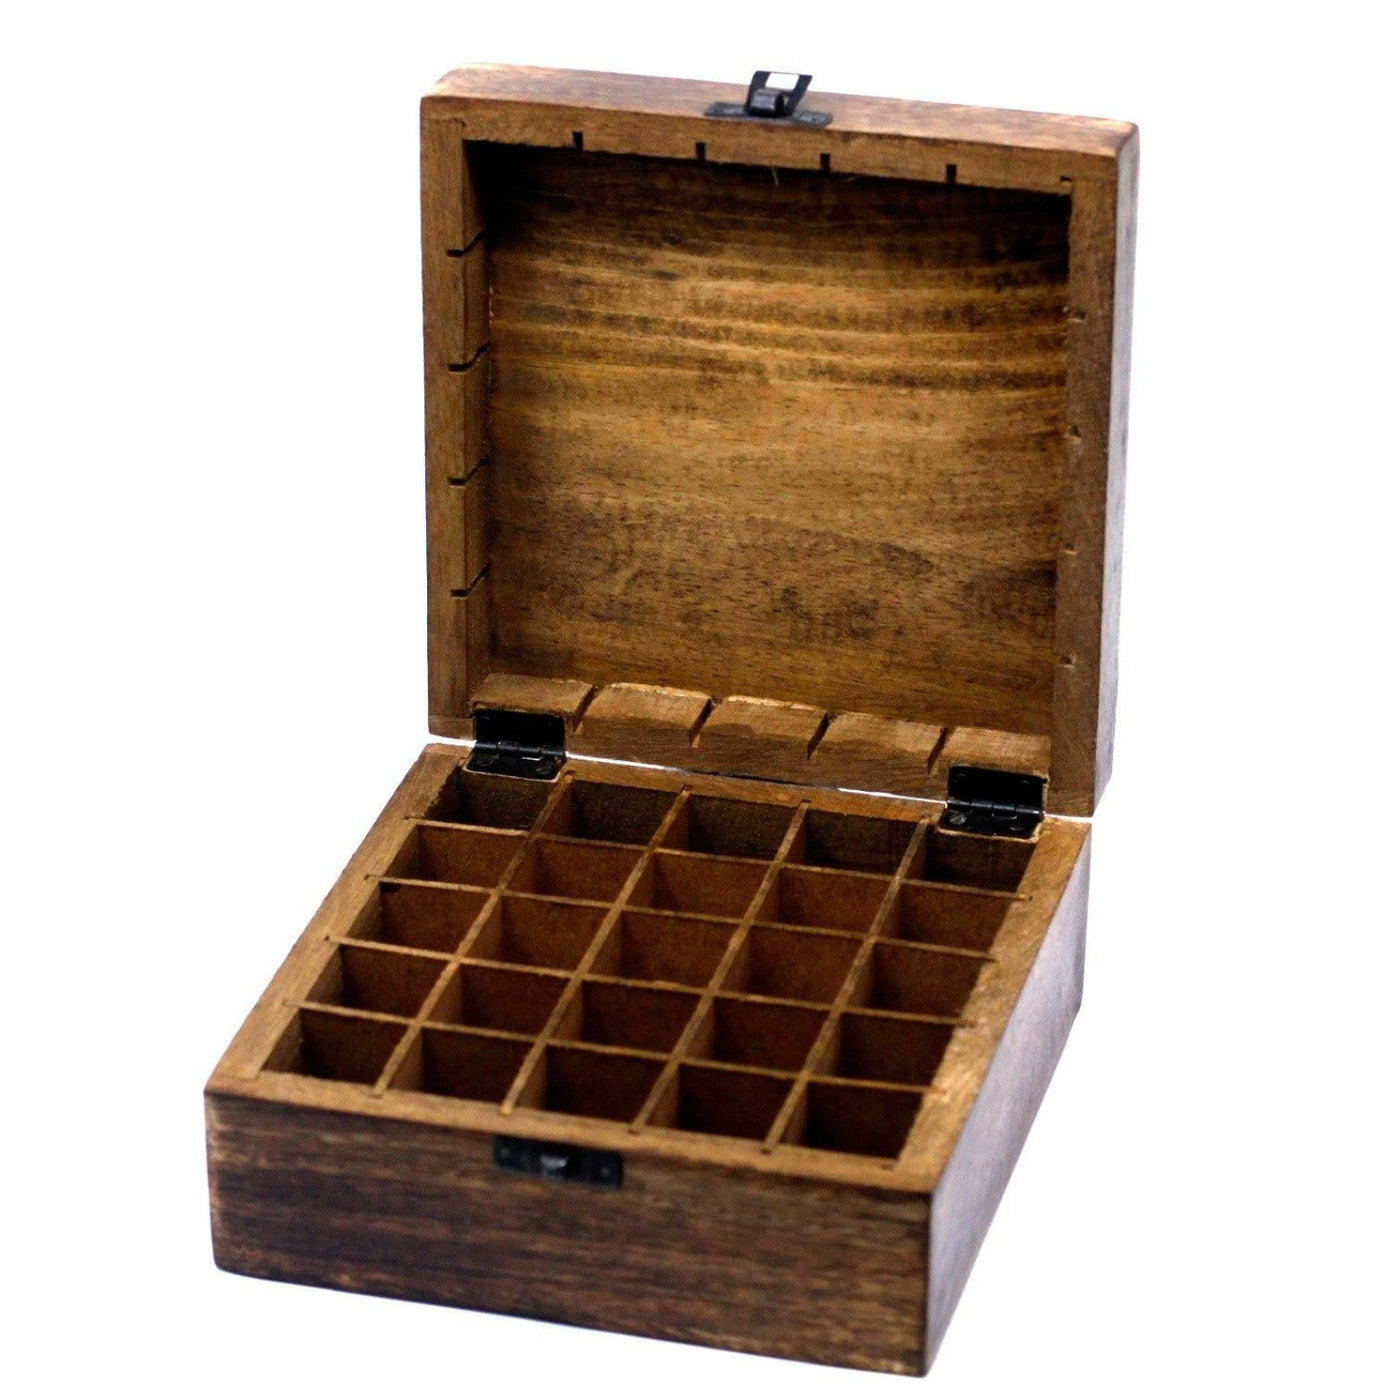 Floral Carved Mango Wood Aromatherapy And Jewellery Oils Storage Box for 10ml Bottles.